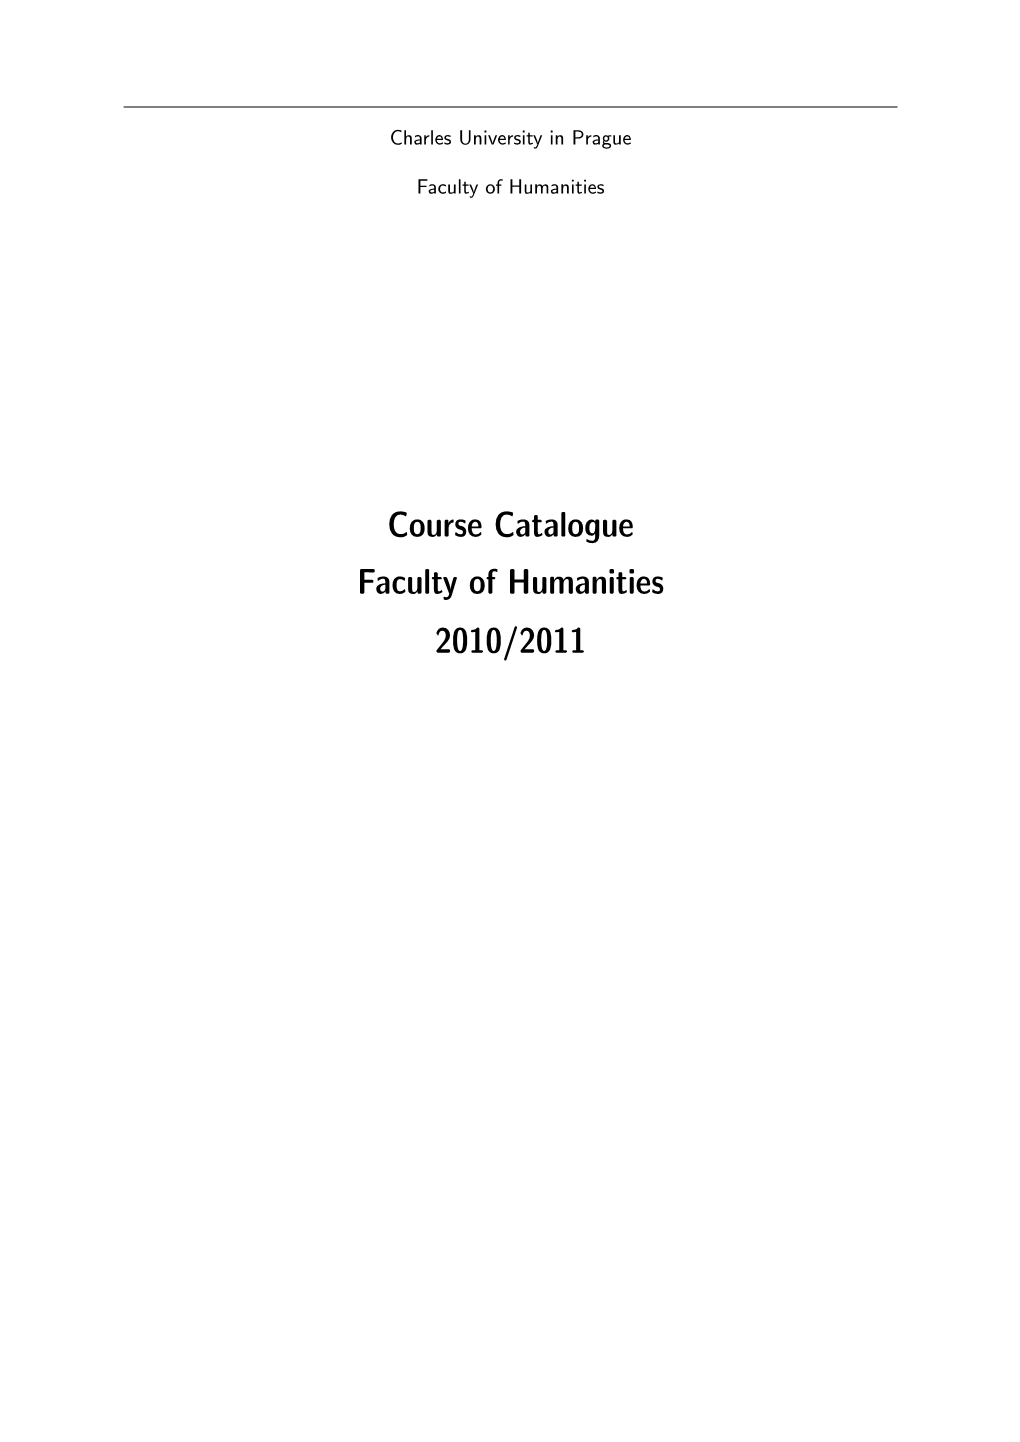 Course Catalogue Faculty of Humanities 2010/2011